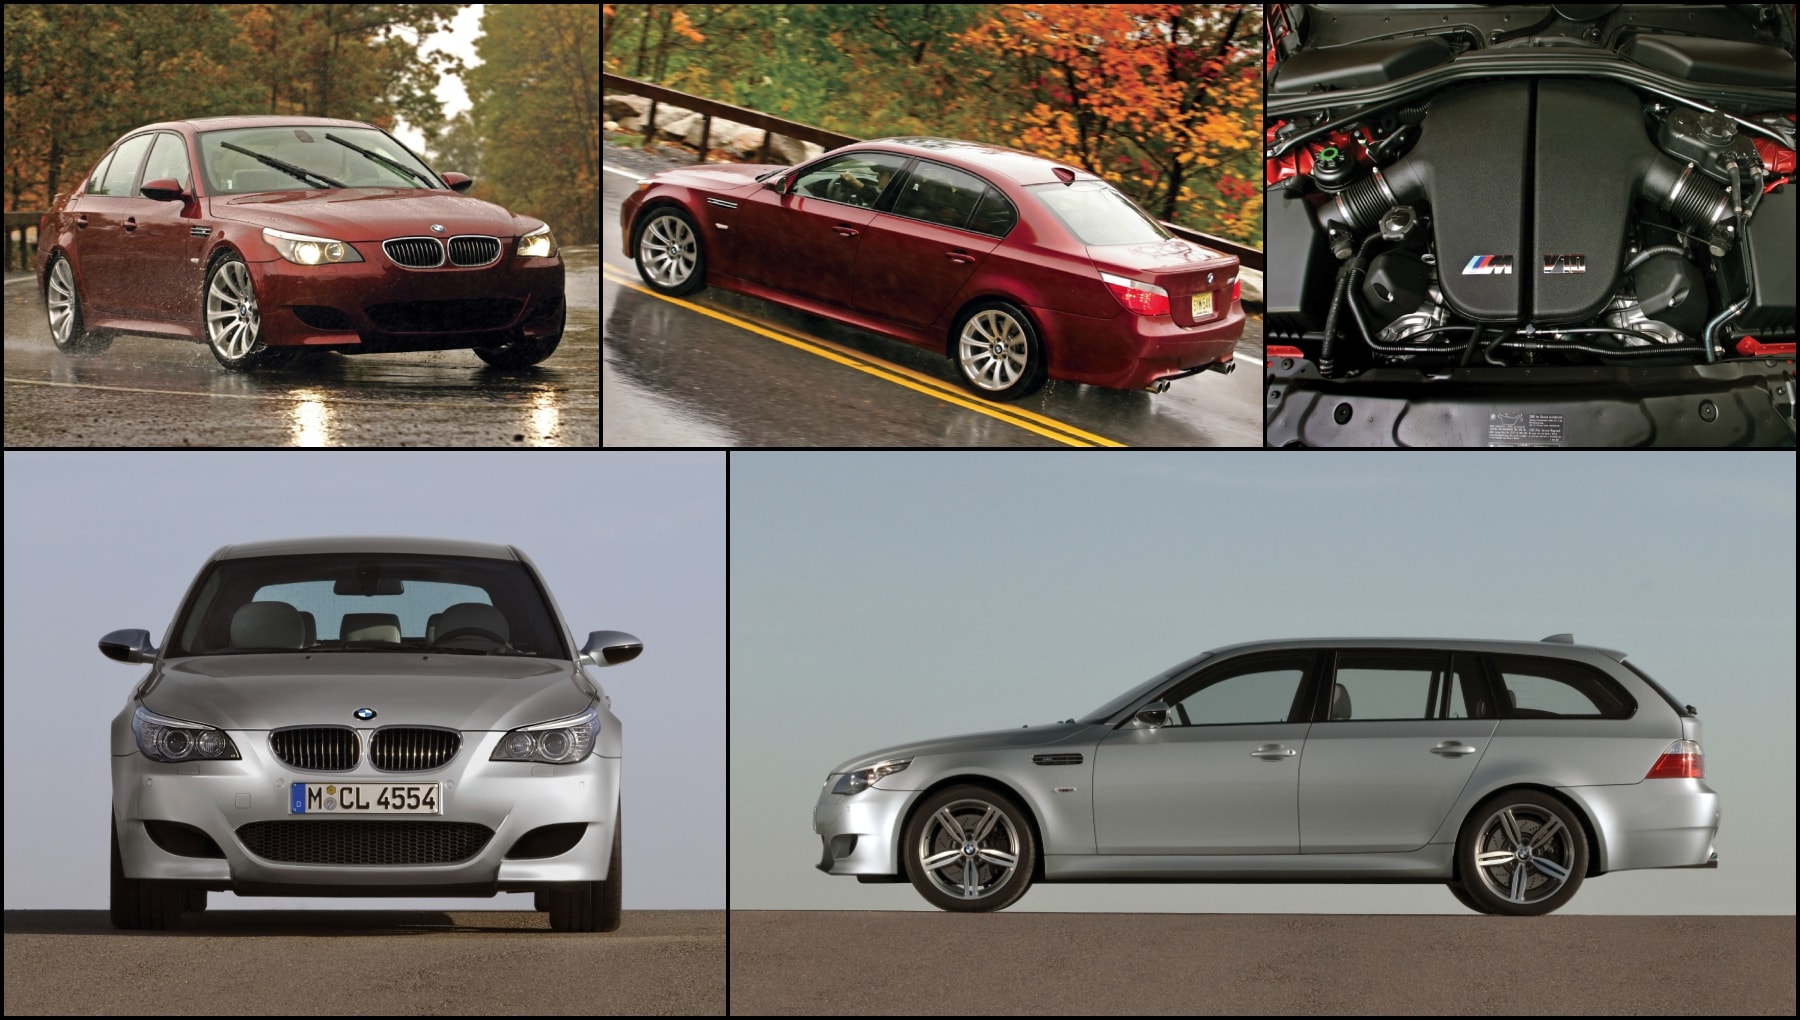 BMW E60 M5: Was it really BETTER than the E39 m5?? 